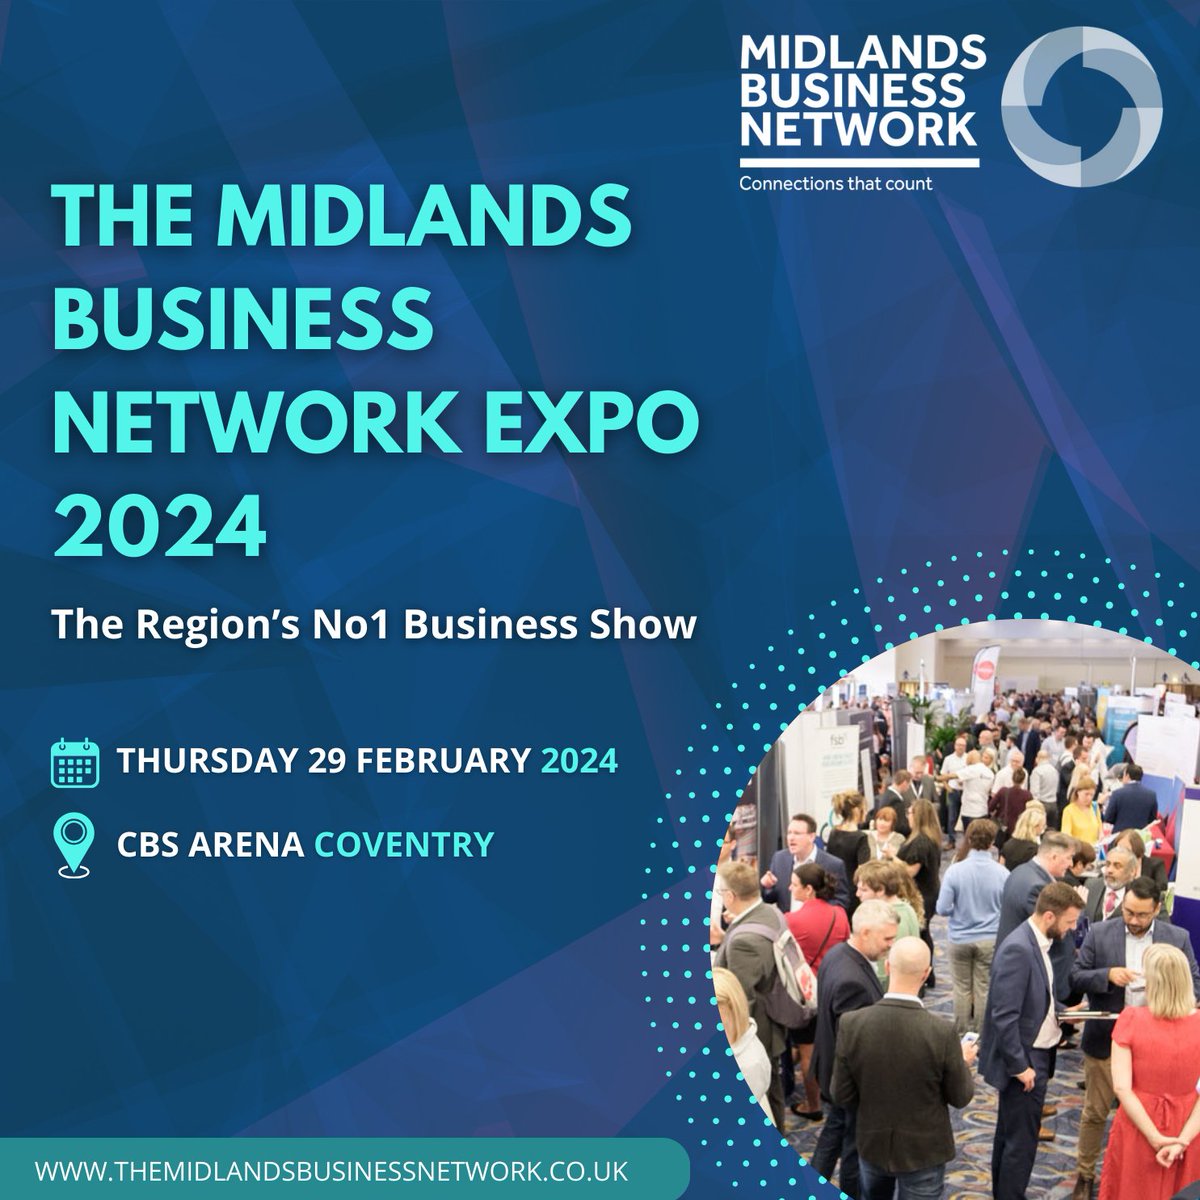 The IFS team is heading to Coventry for the #MBNEXPO2024 The region’s largest business event. If you are attending, drop by and pay us a visit! You will even get the chance you get your hands on the Infamous IFS Pro V1 Golf Balls!